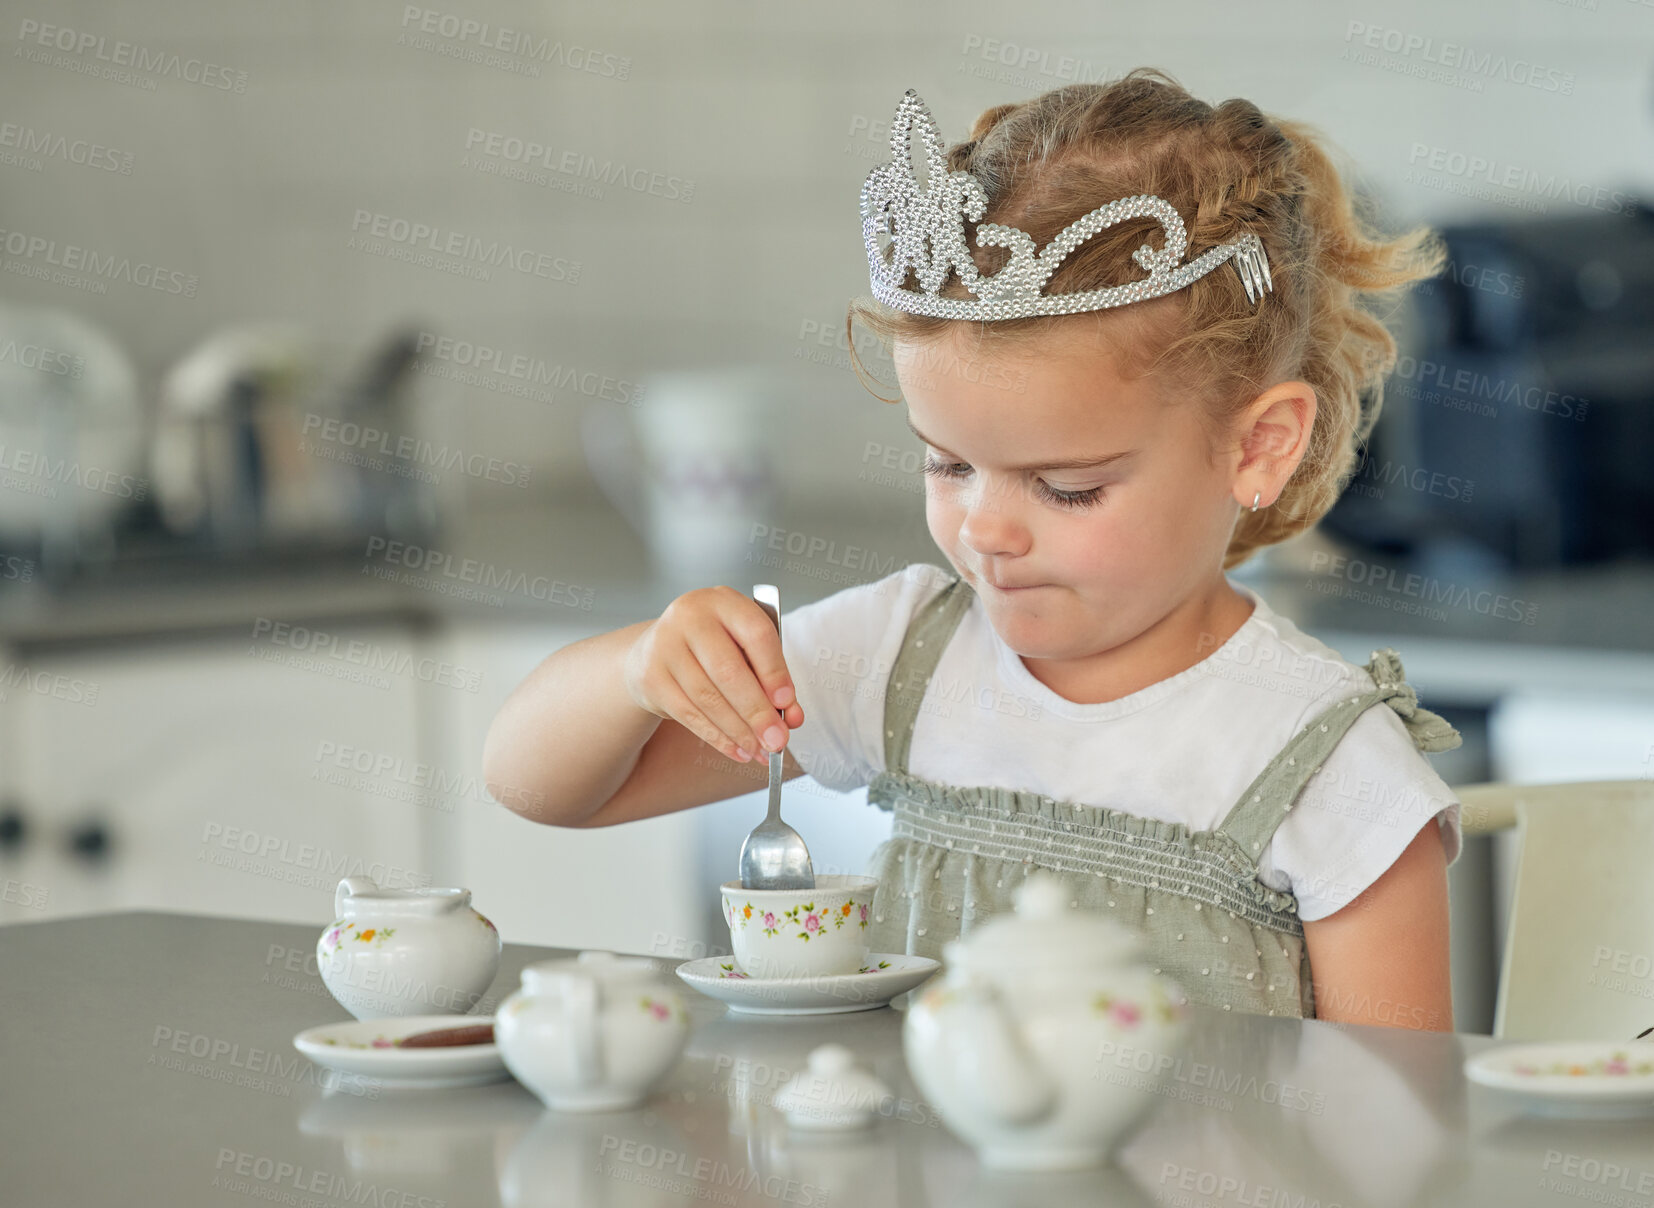 Buy stock photo A little girl having a tea party at home. Cute brunette female wearing a tiara while playing with tea set and having cookies at kitchen table.